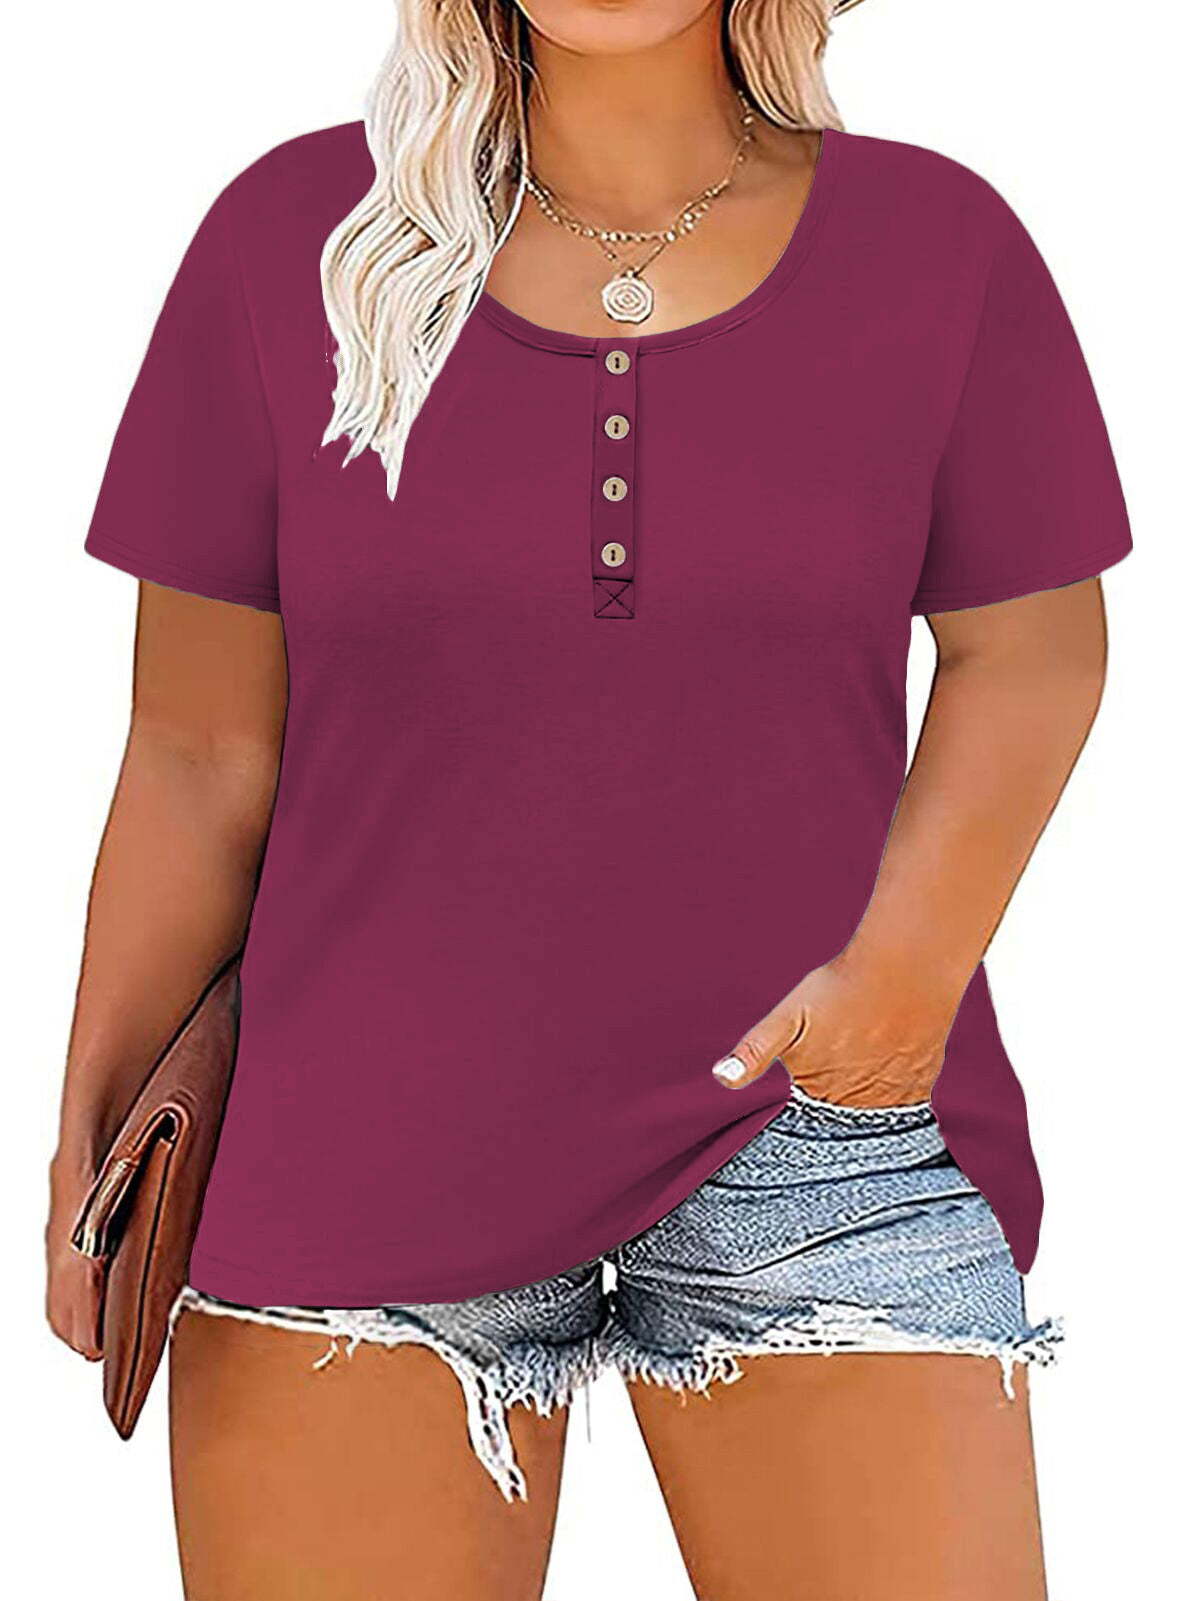  Plus Size Floral Tops For Women 5X Ladies Henley Shirts  Buttons Up Summer Tees Solid Hot Pink Short Sleeve Tunics Casual Blouses 5XL  26W 28W